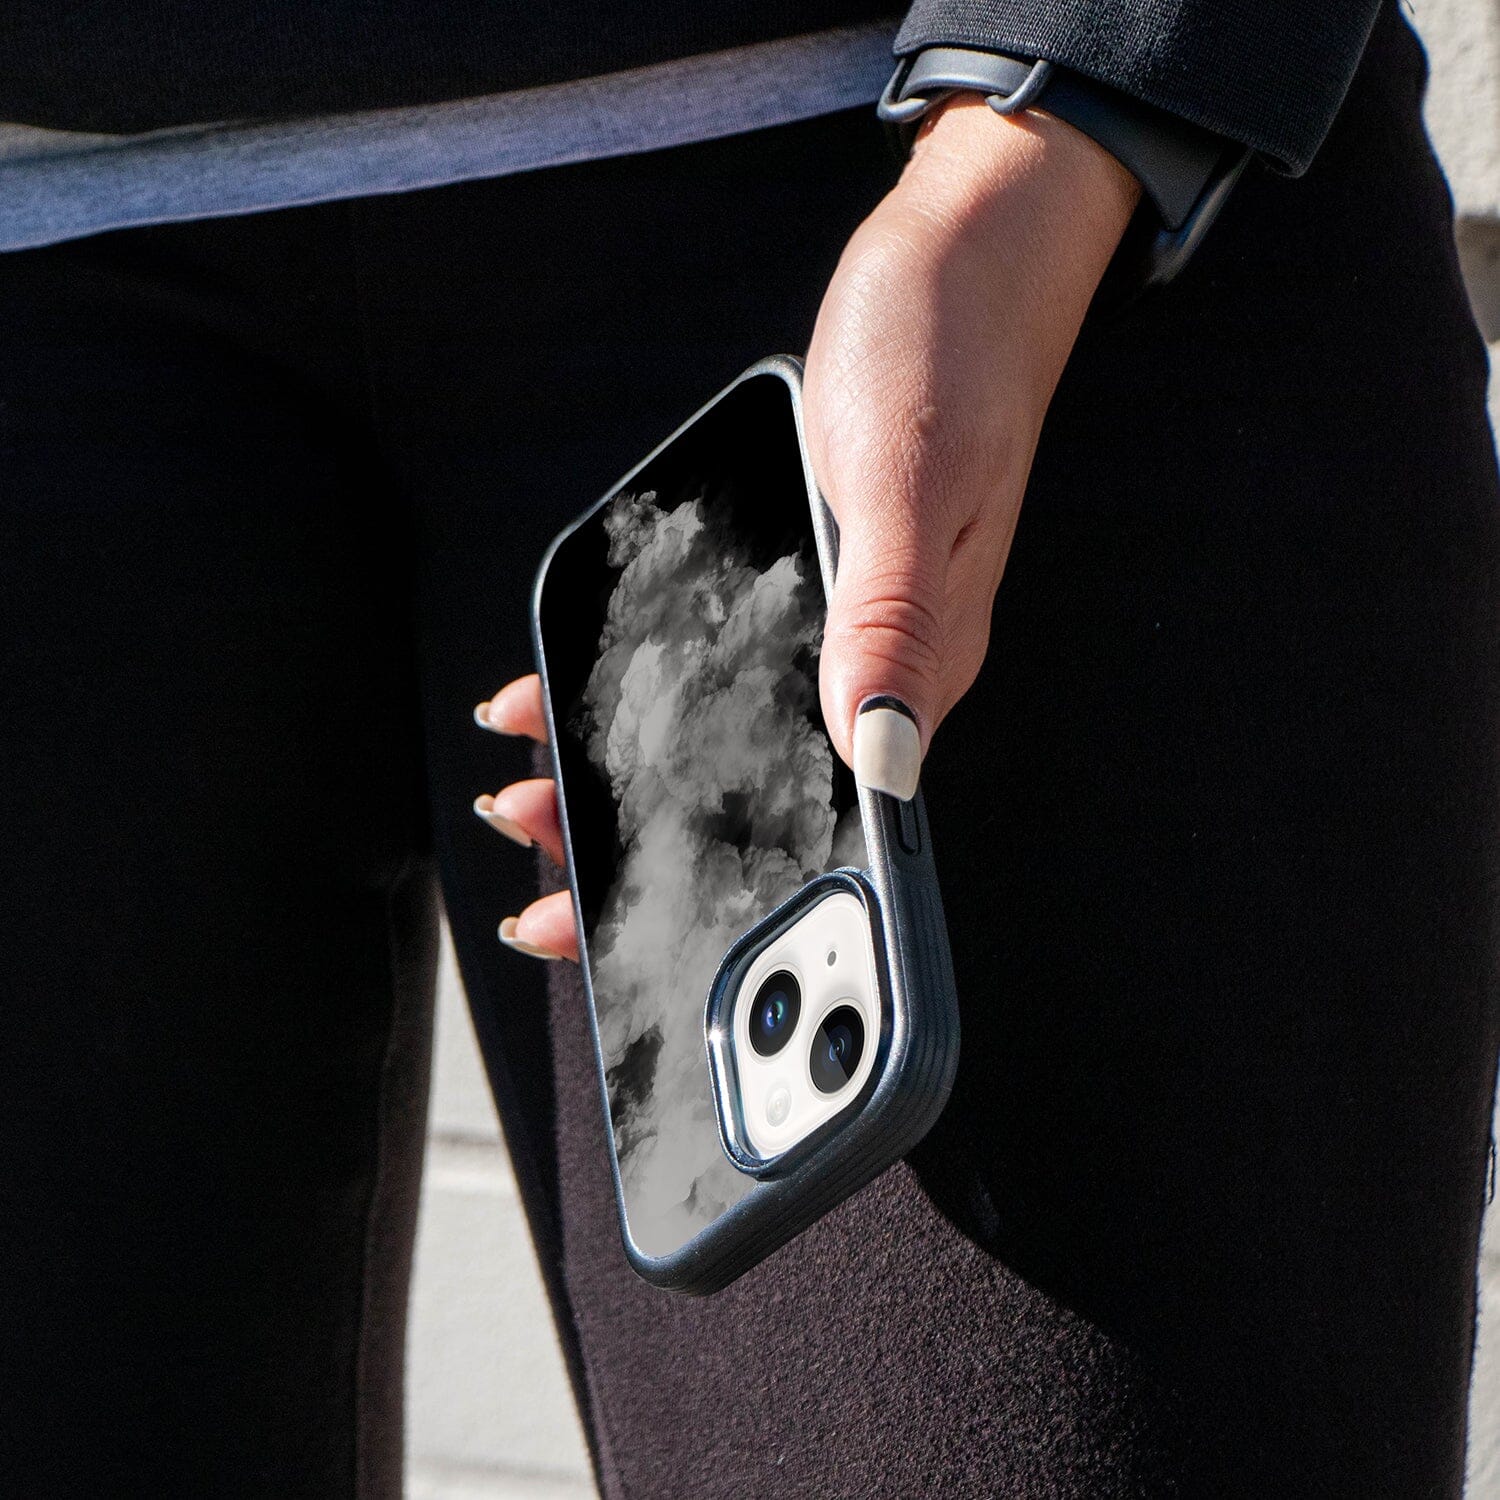 iPhone 13 Cloud Pattern Design Fremont Grip Case Black and White Color with MagSafe (On Hand)